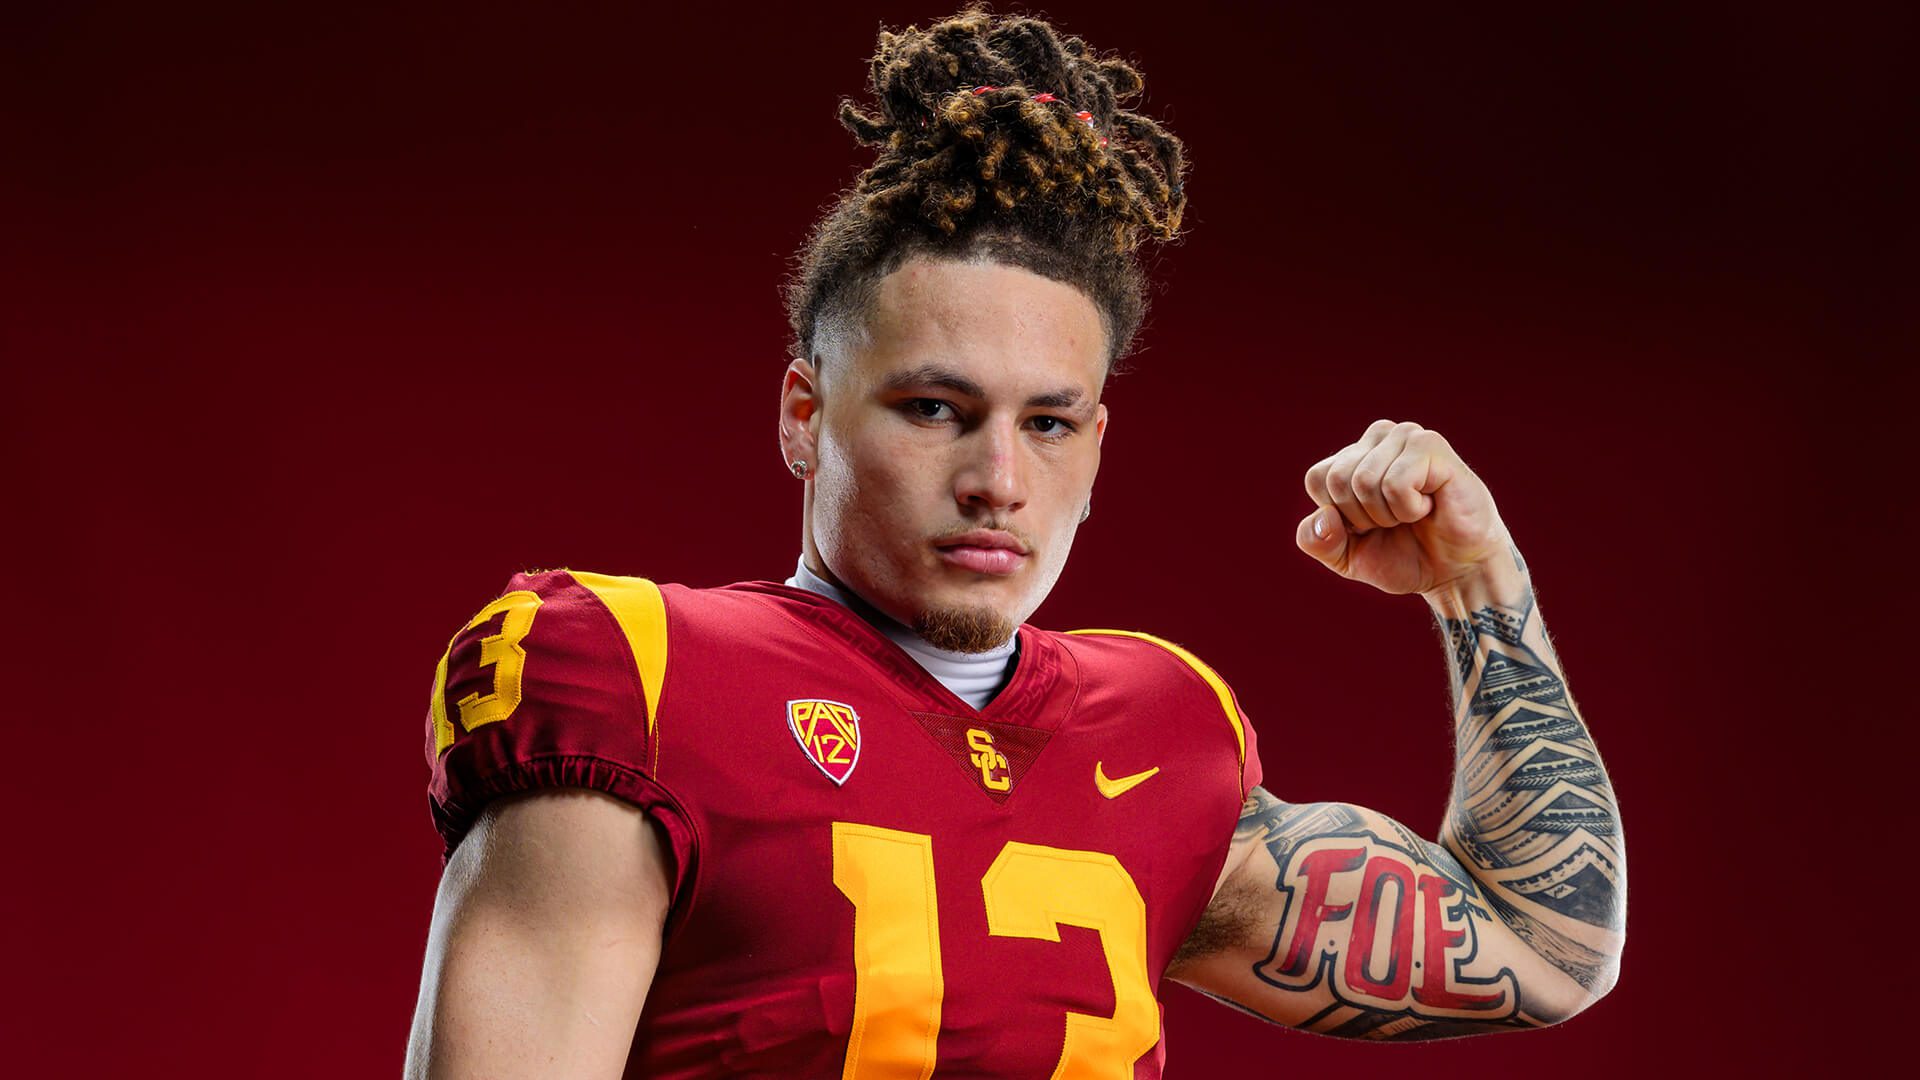 Mason Cobb possesses good good vision and awareness as a recent transfer to USC from Oklahoma State. Hula Bowl scout Ryan Vidales breaks down Cobbas an NFL Prospect in his report.